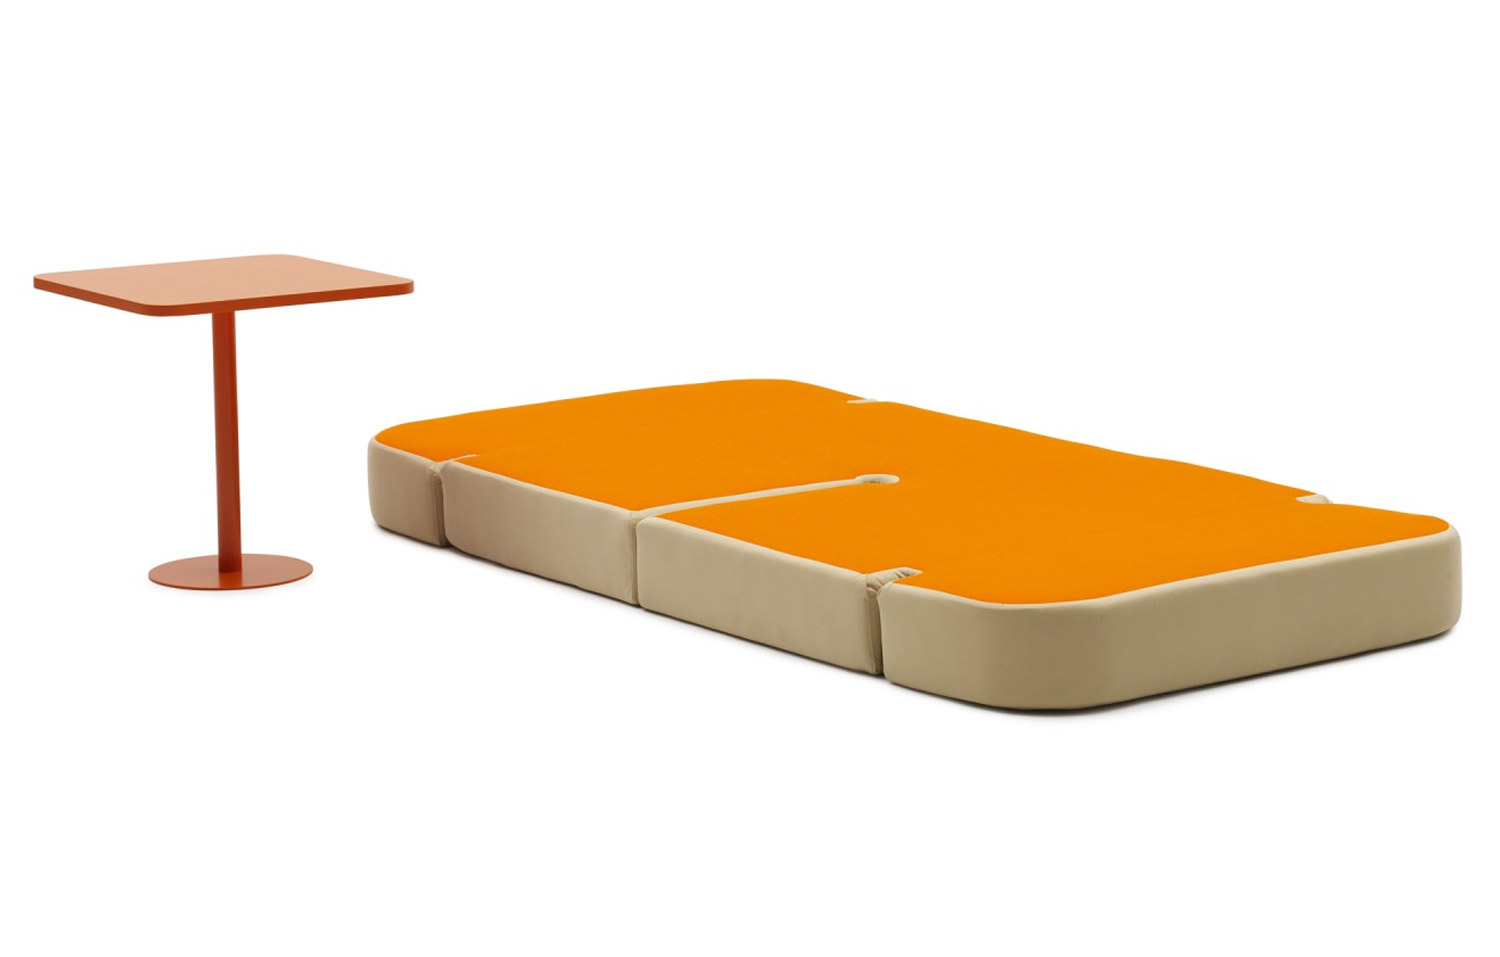 Skin and orange-colored Converting Folding Table To Bed with red-colored side detachable table